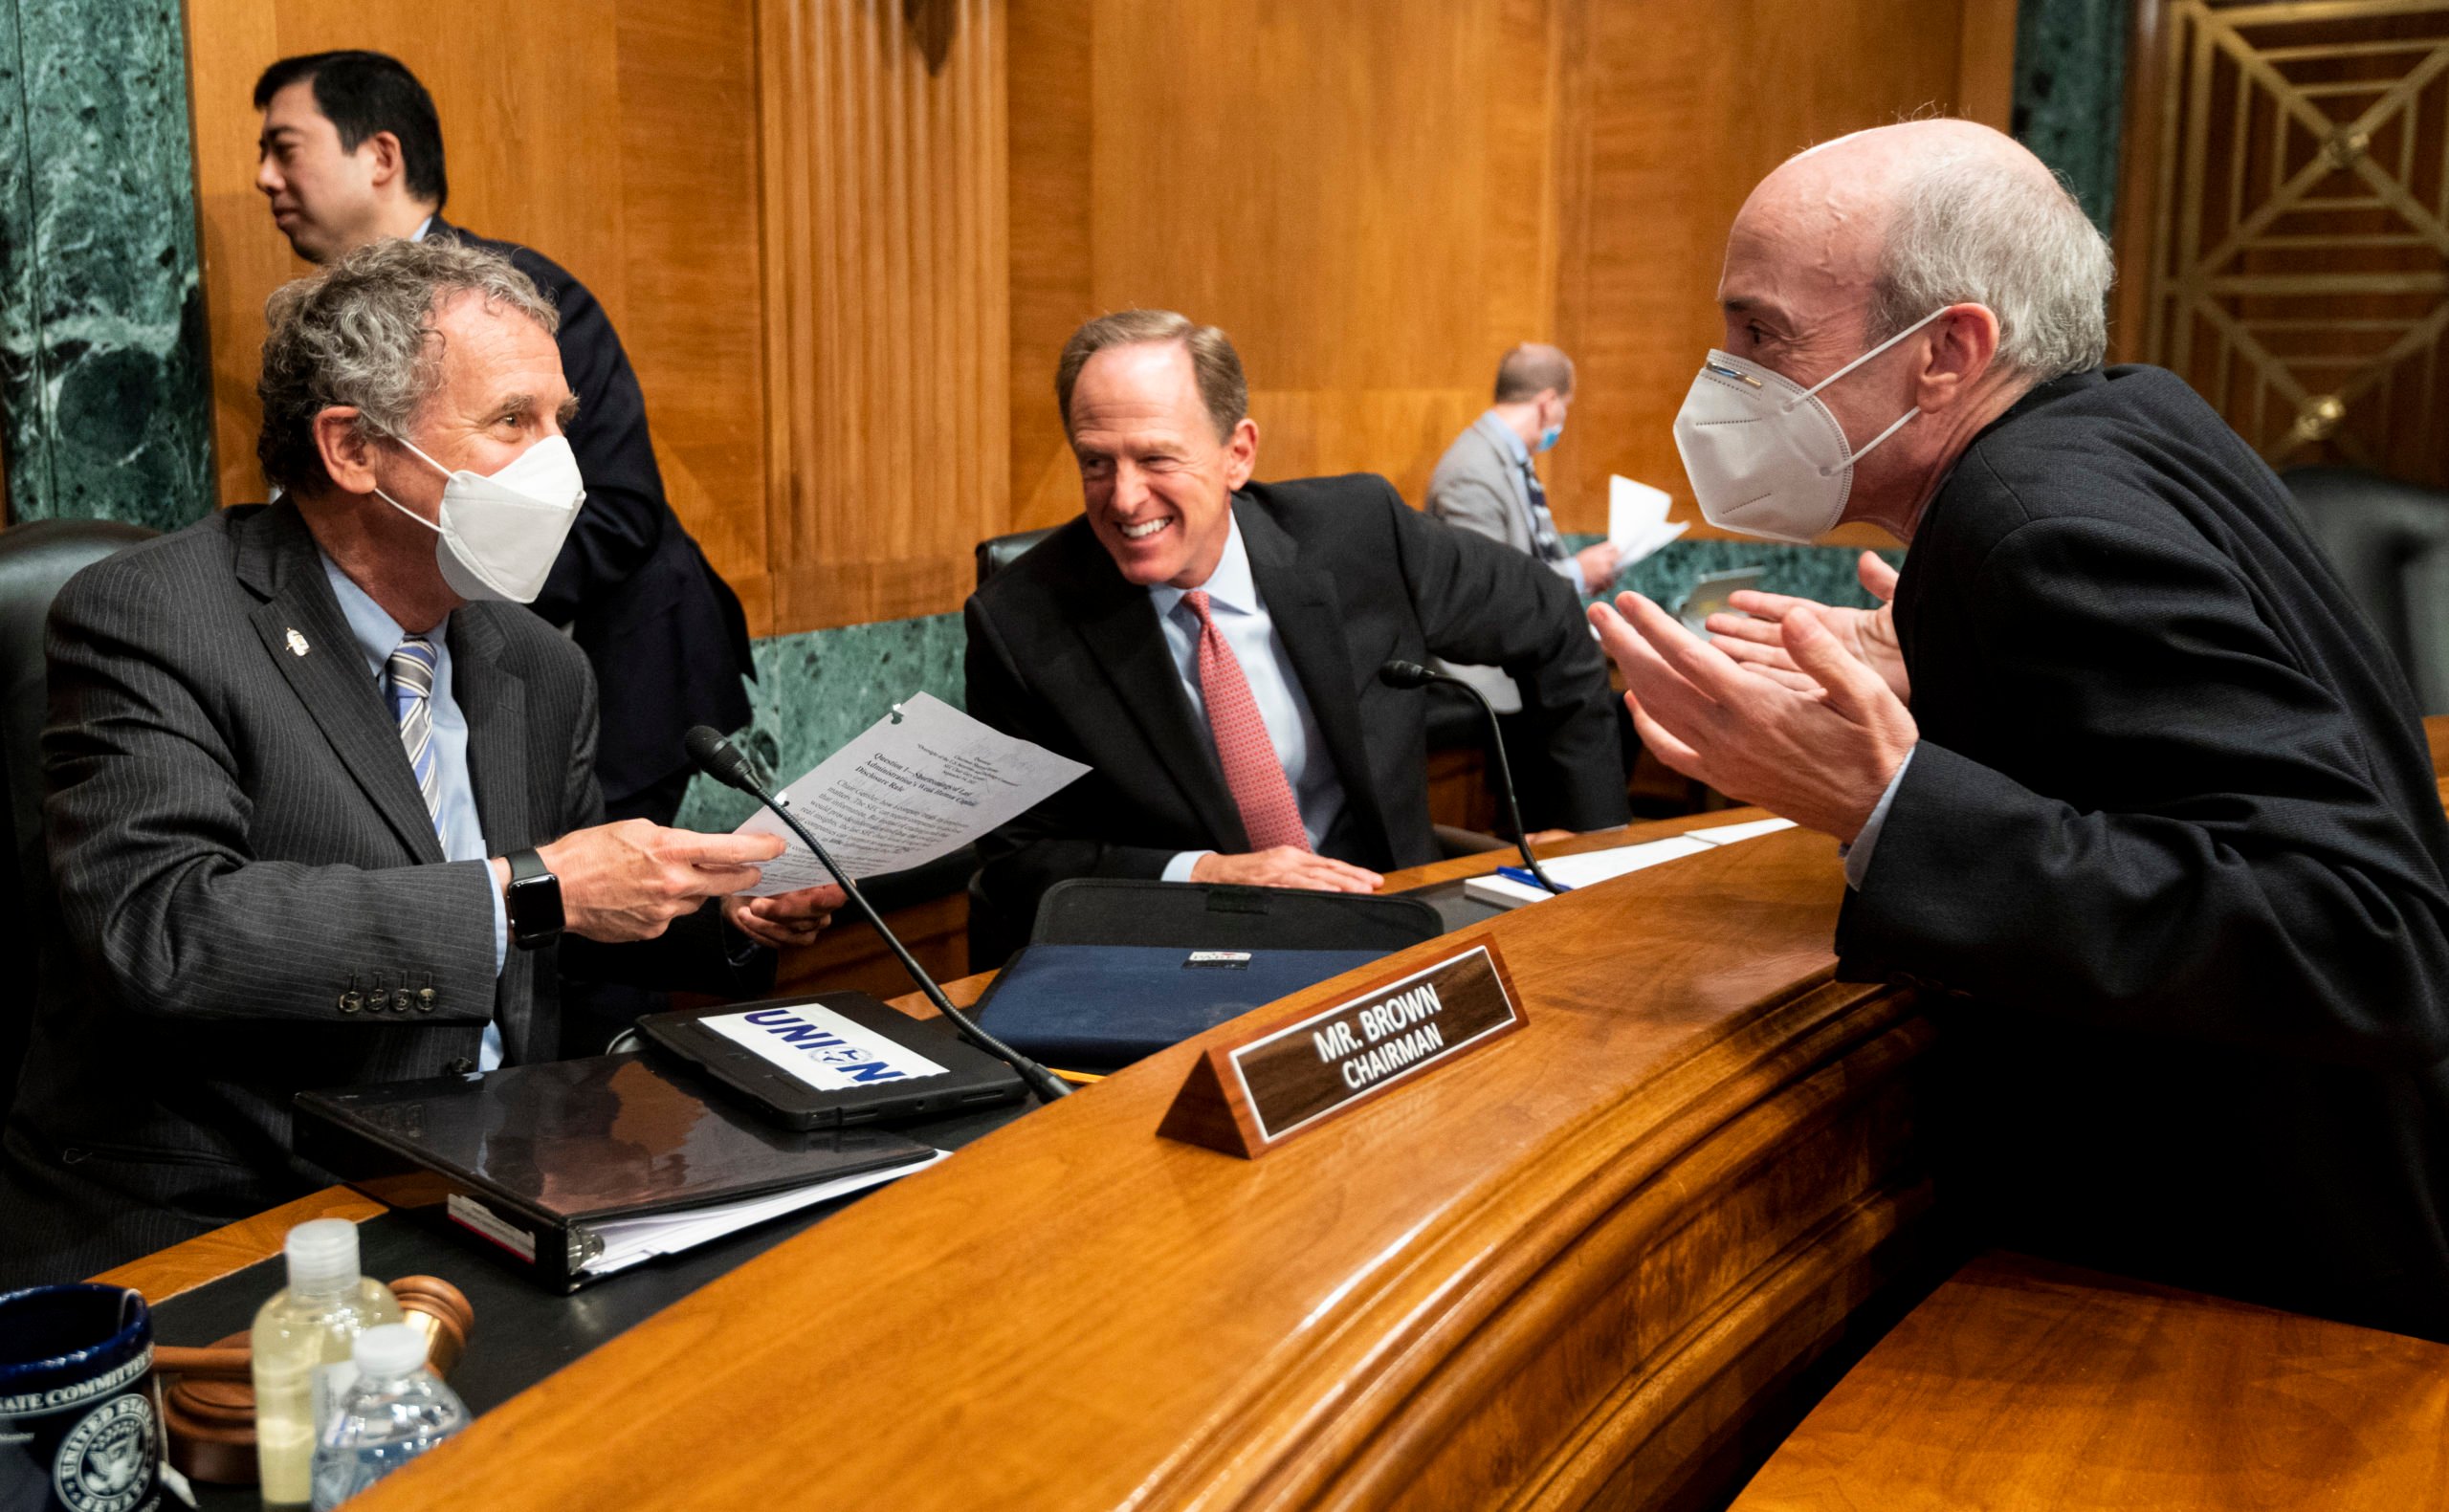 Banking Committee Chairman Sherrod Brown and Ranking Member Pat Toomey speak with SEC Chair Gary Gensler before a hearing on Sept. 14 in Washington, D.C. (Bill Clark/Pool/Getty Images)